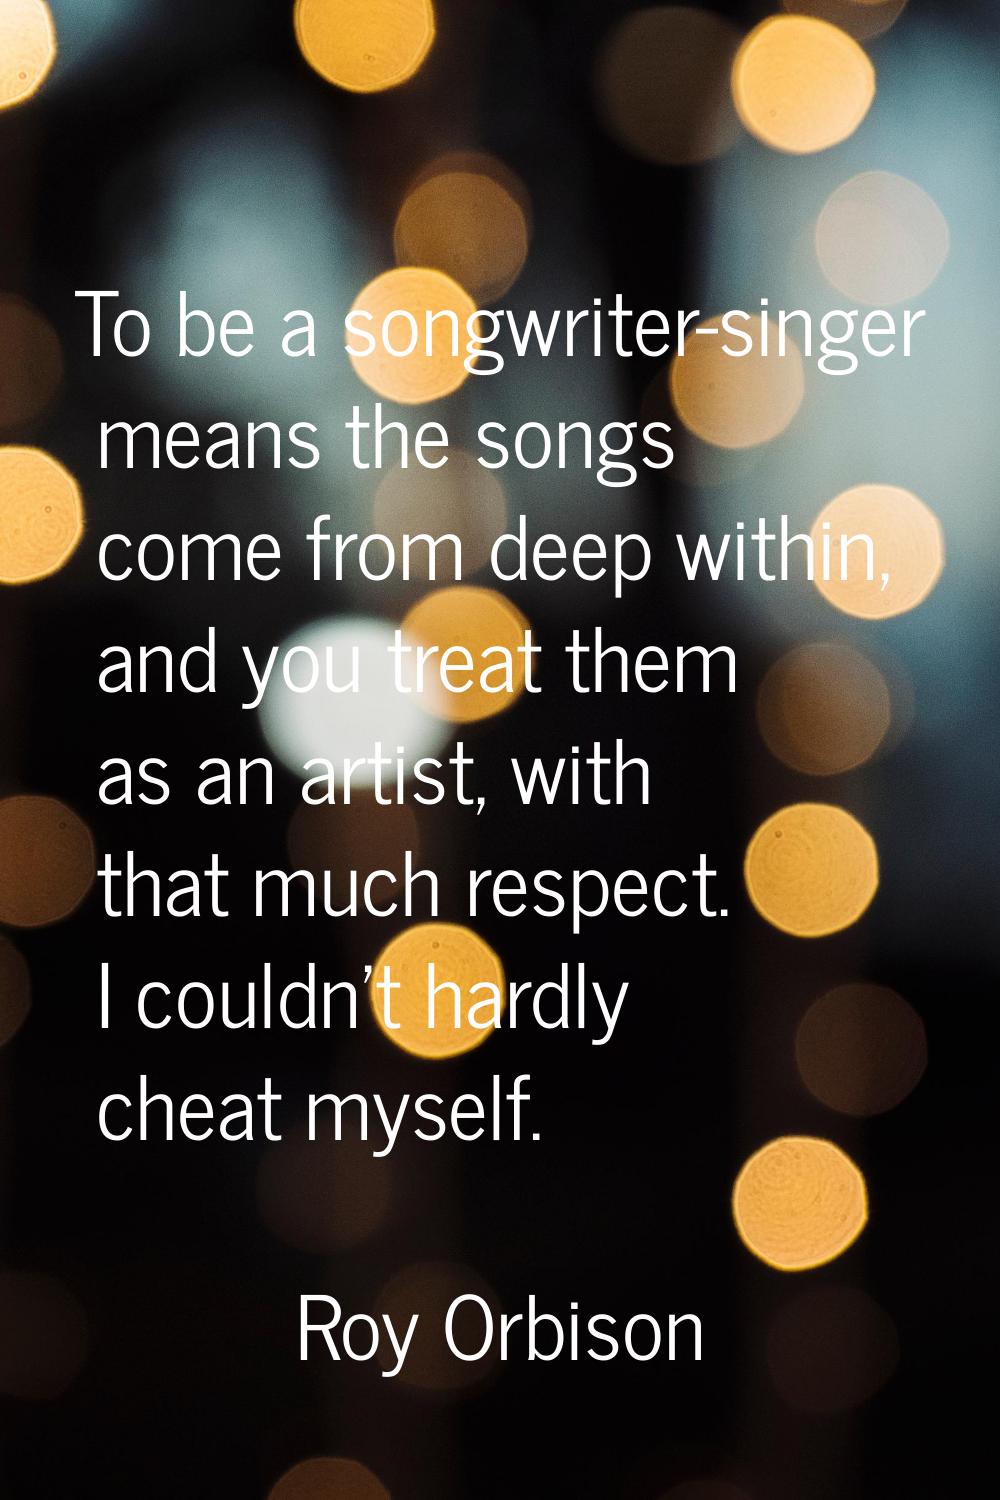 To be a songwriter-singer means the songs come from deep within, and you treat them as an artist, w